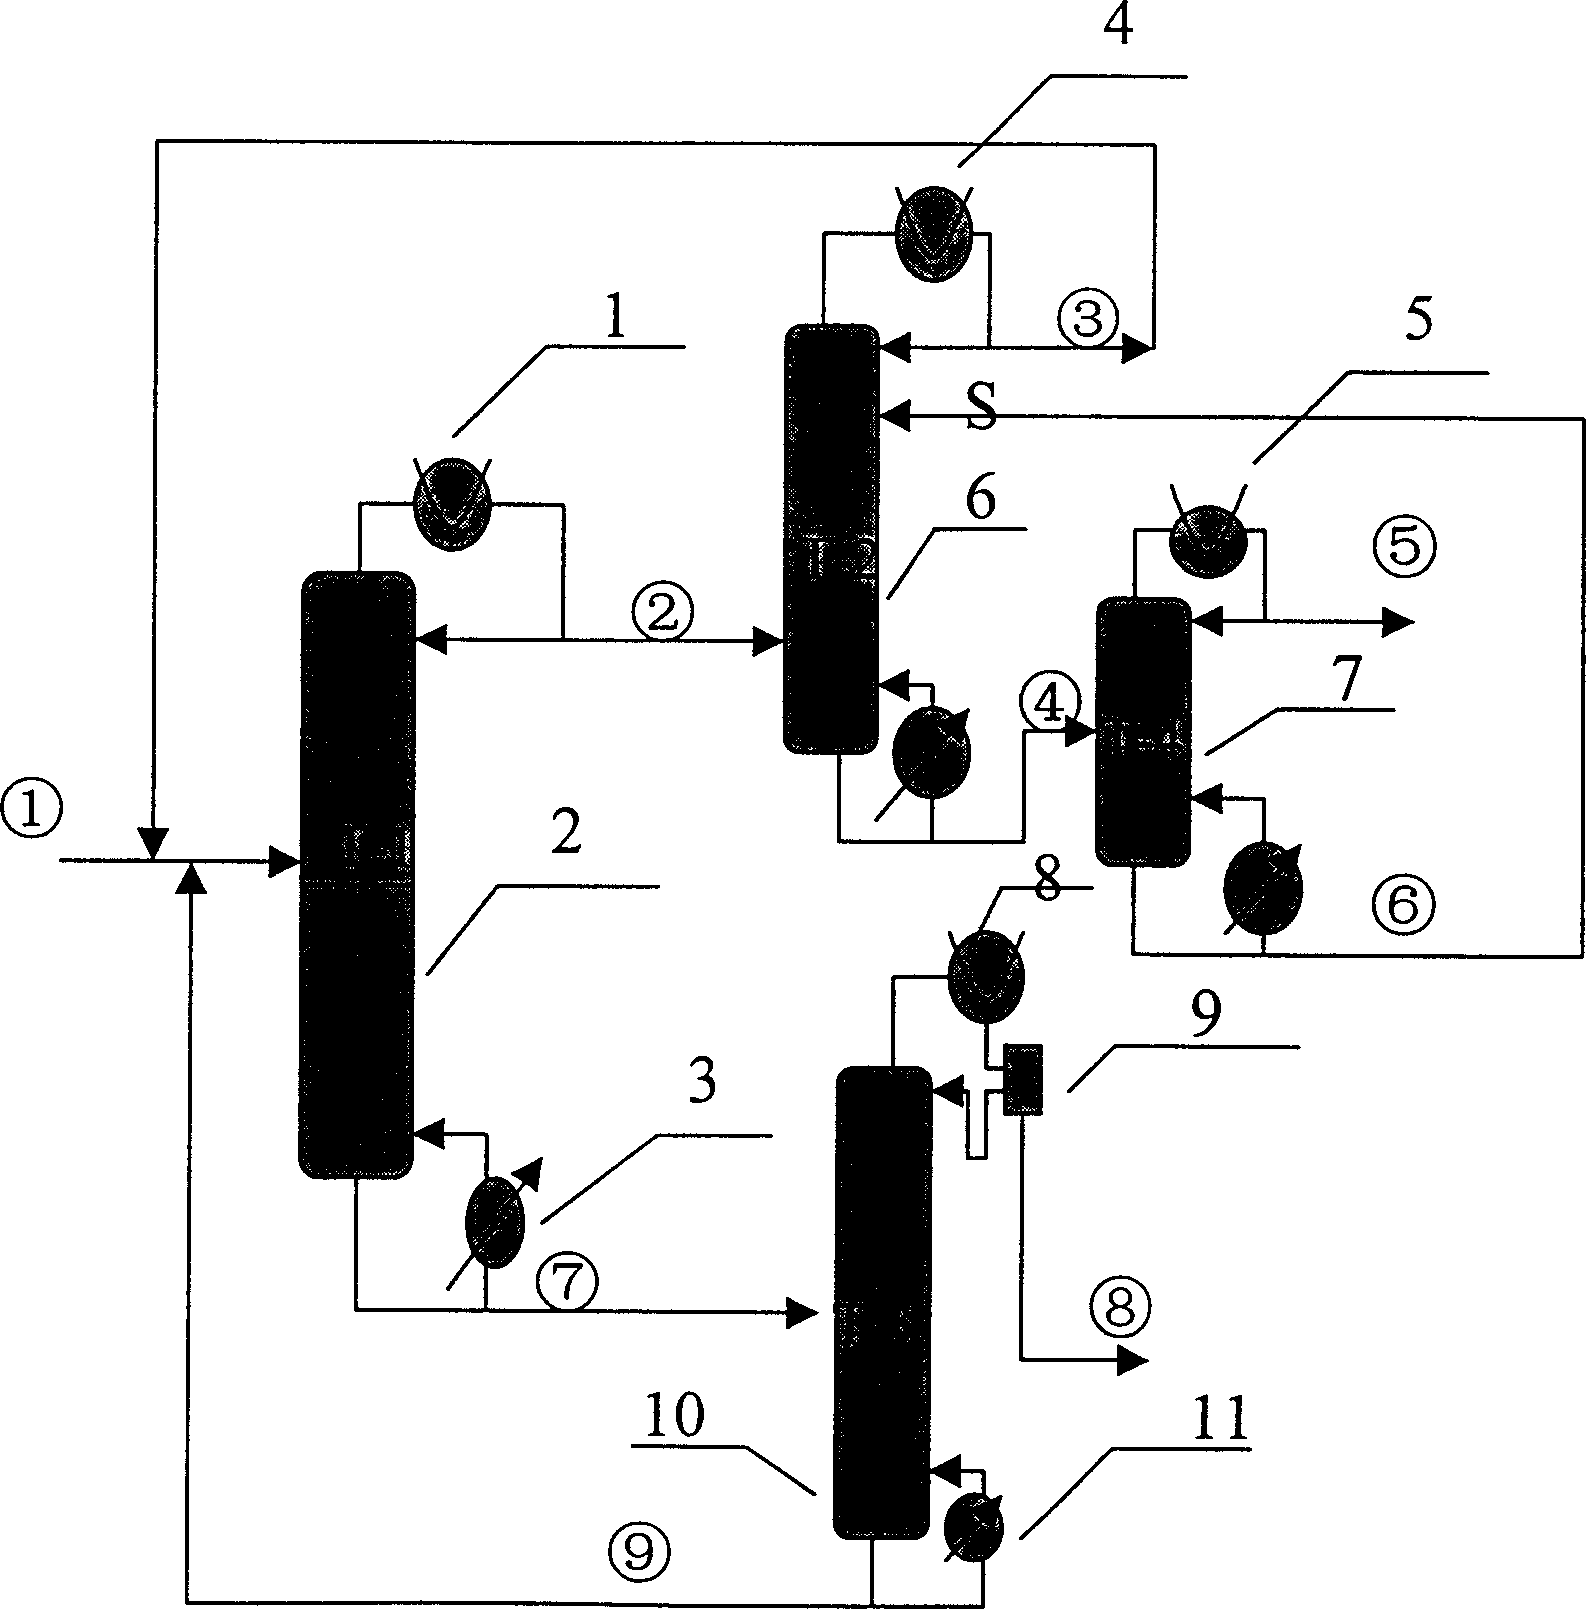 Process for separating ethandiol, mono methyl ether, isopropyl alcohol and water combined by extracting and axeotropy